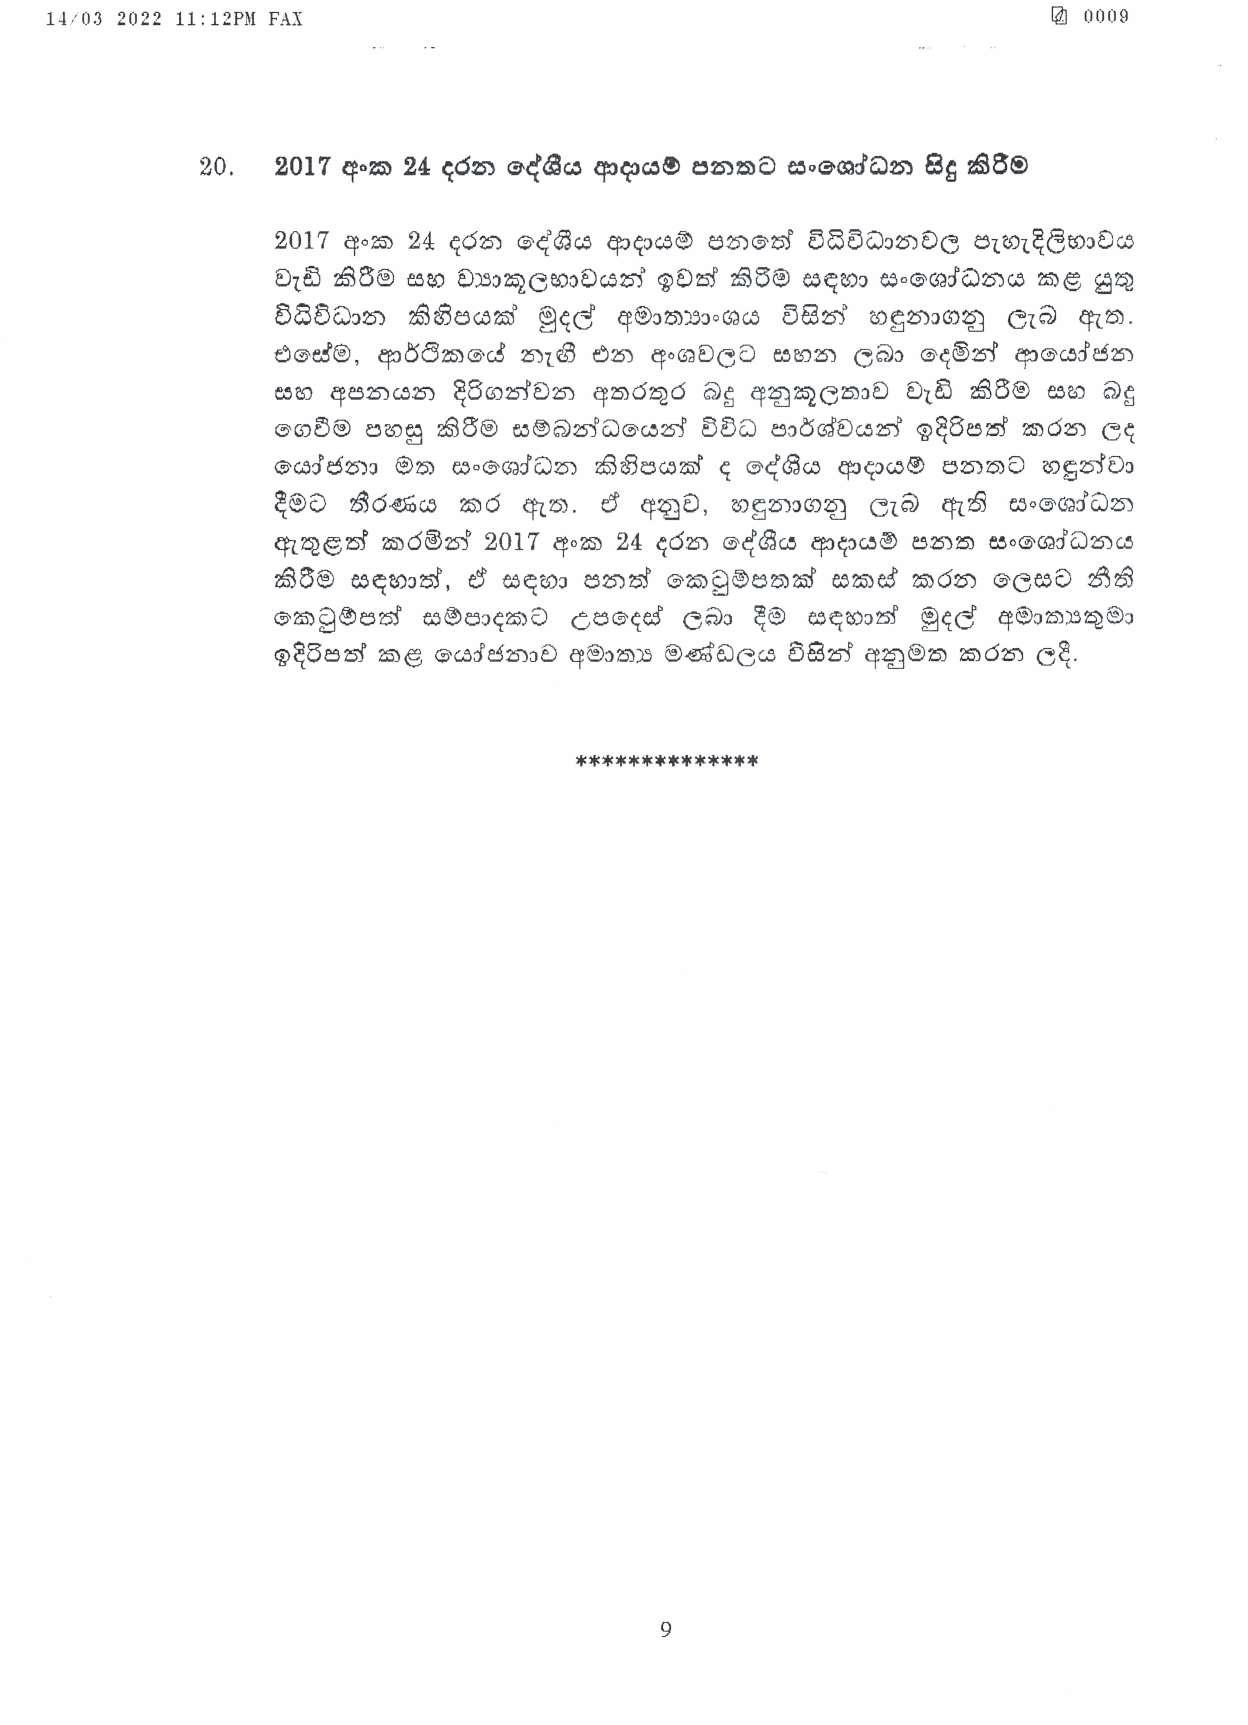 Cabinet Decision on 14.03.2022 page 001